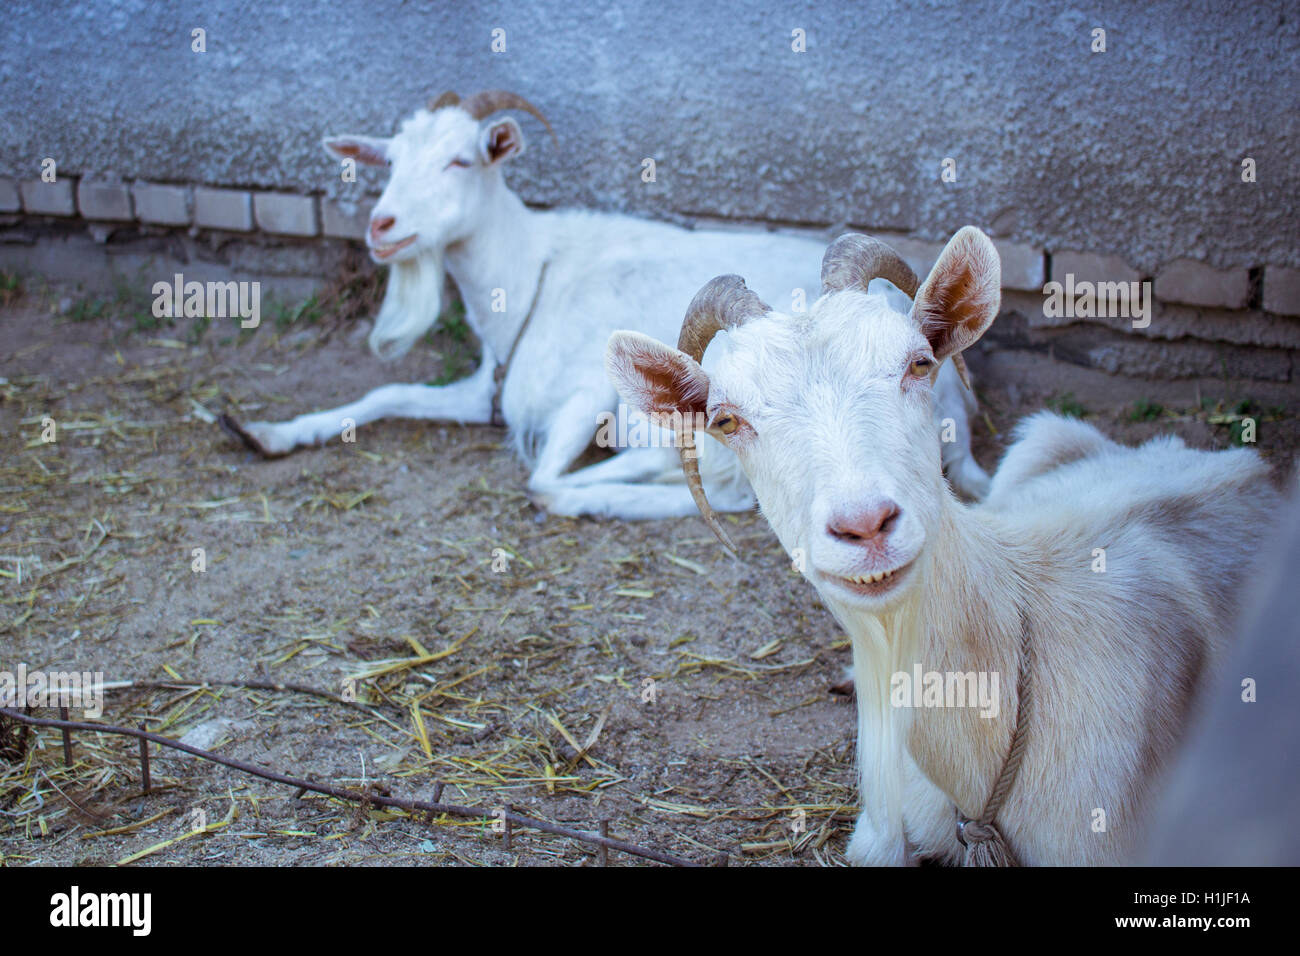 White goat laying at farm stall countryside Stock Photo